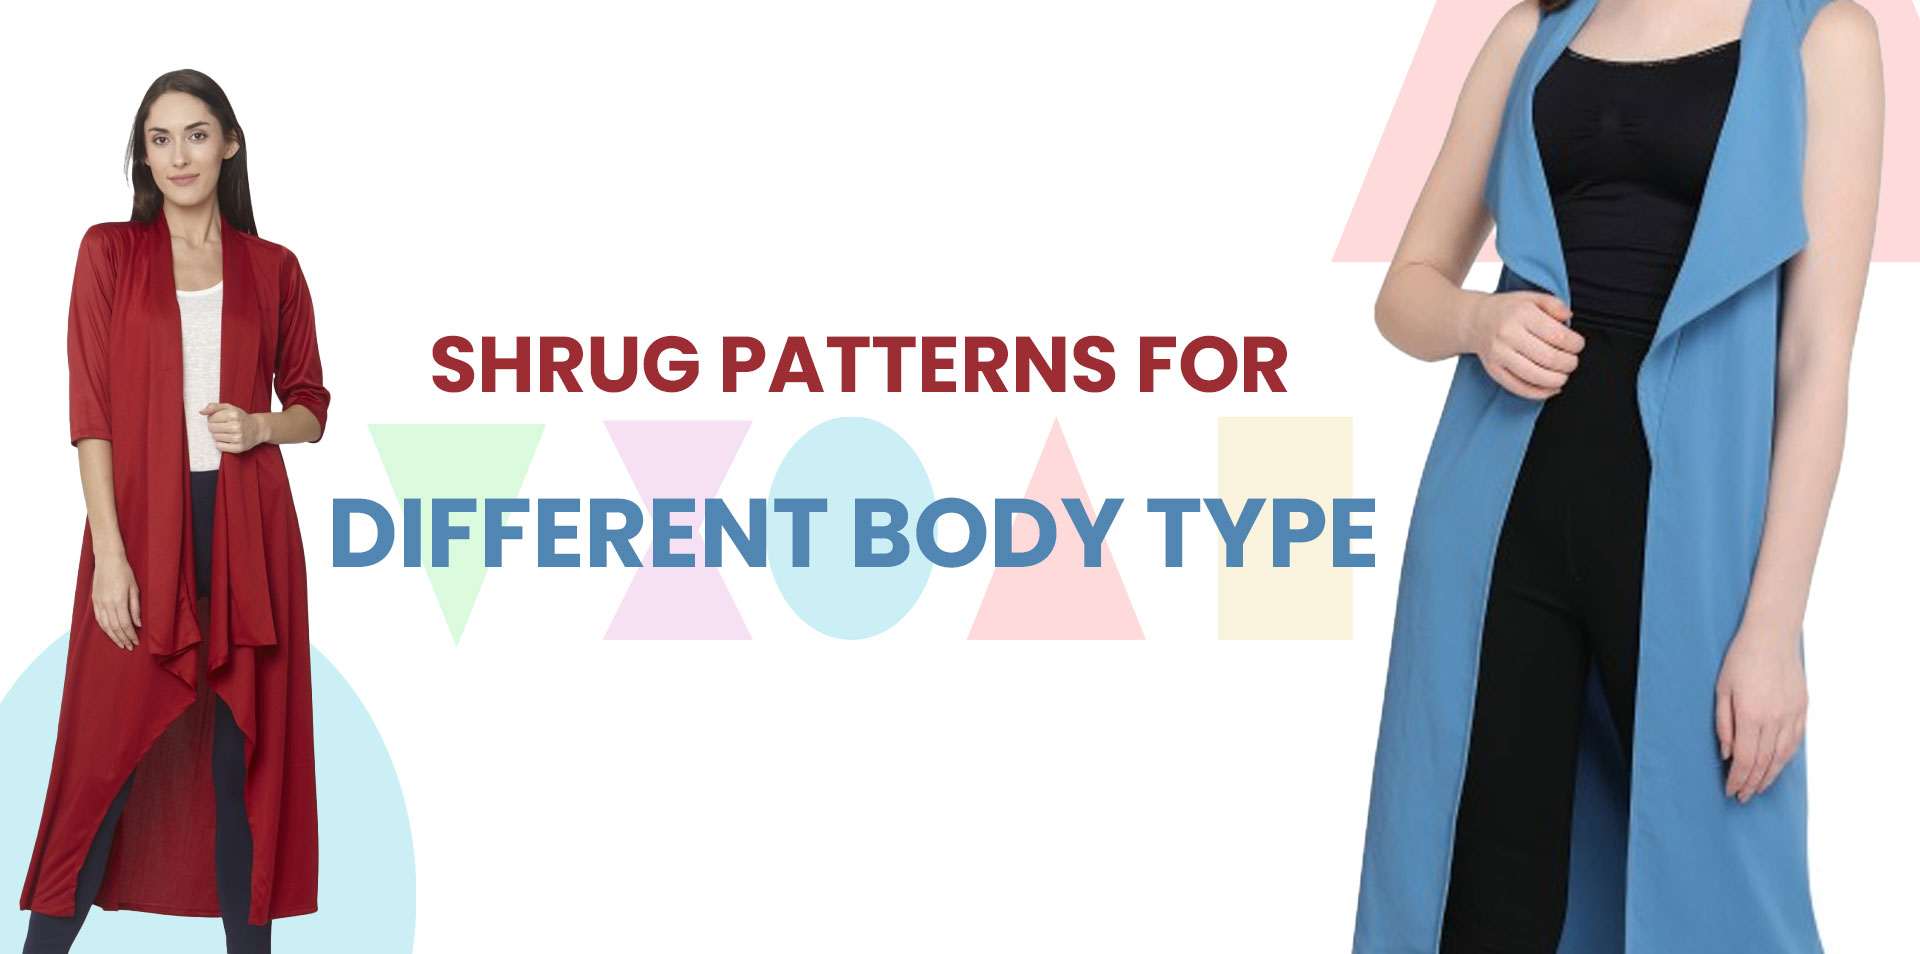 Top 4 Shrug patterns for different body types